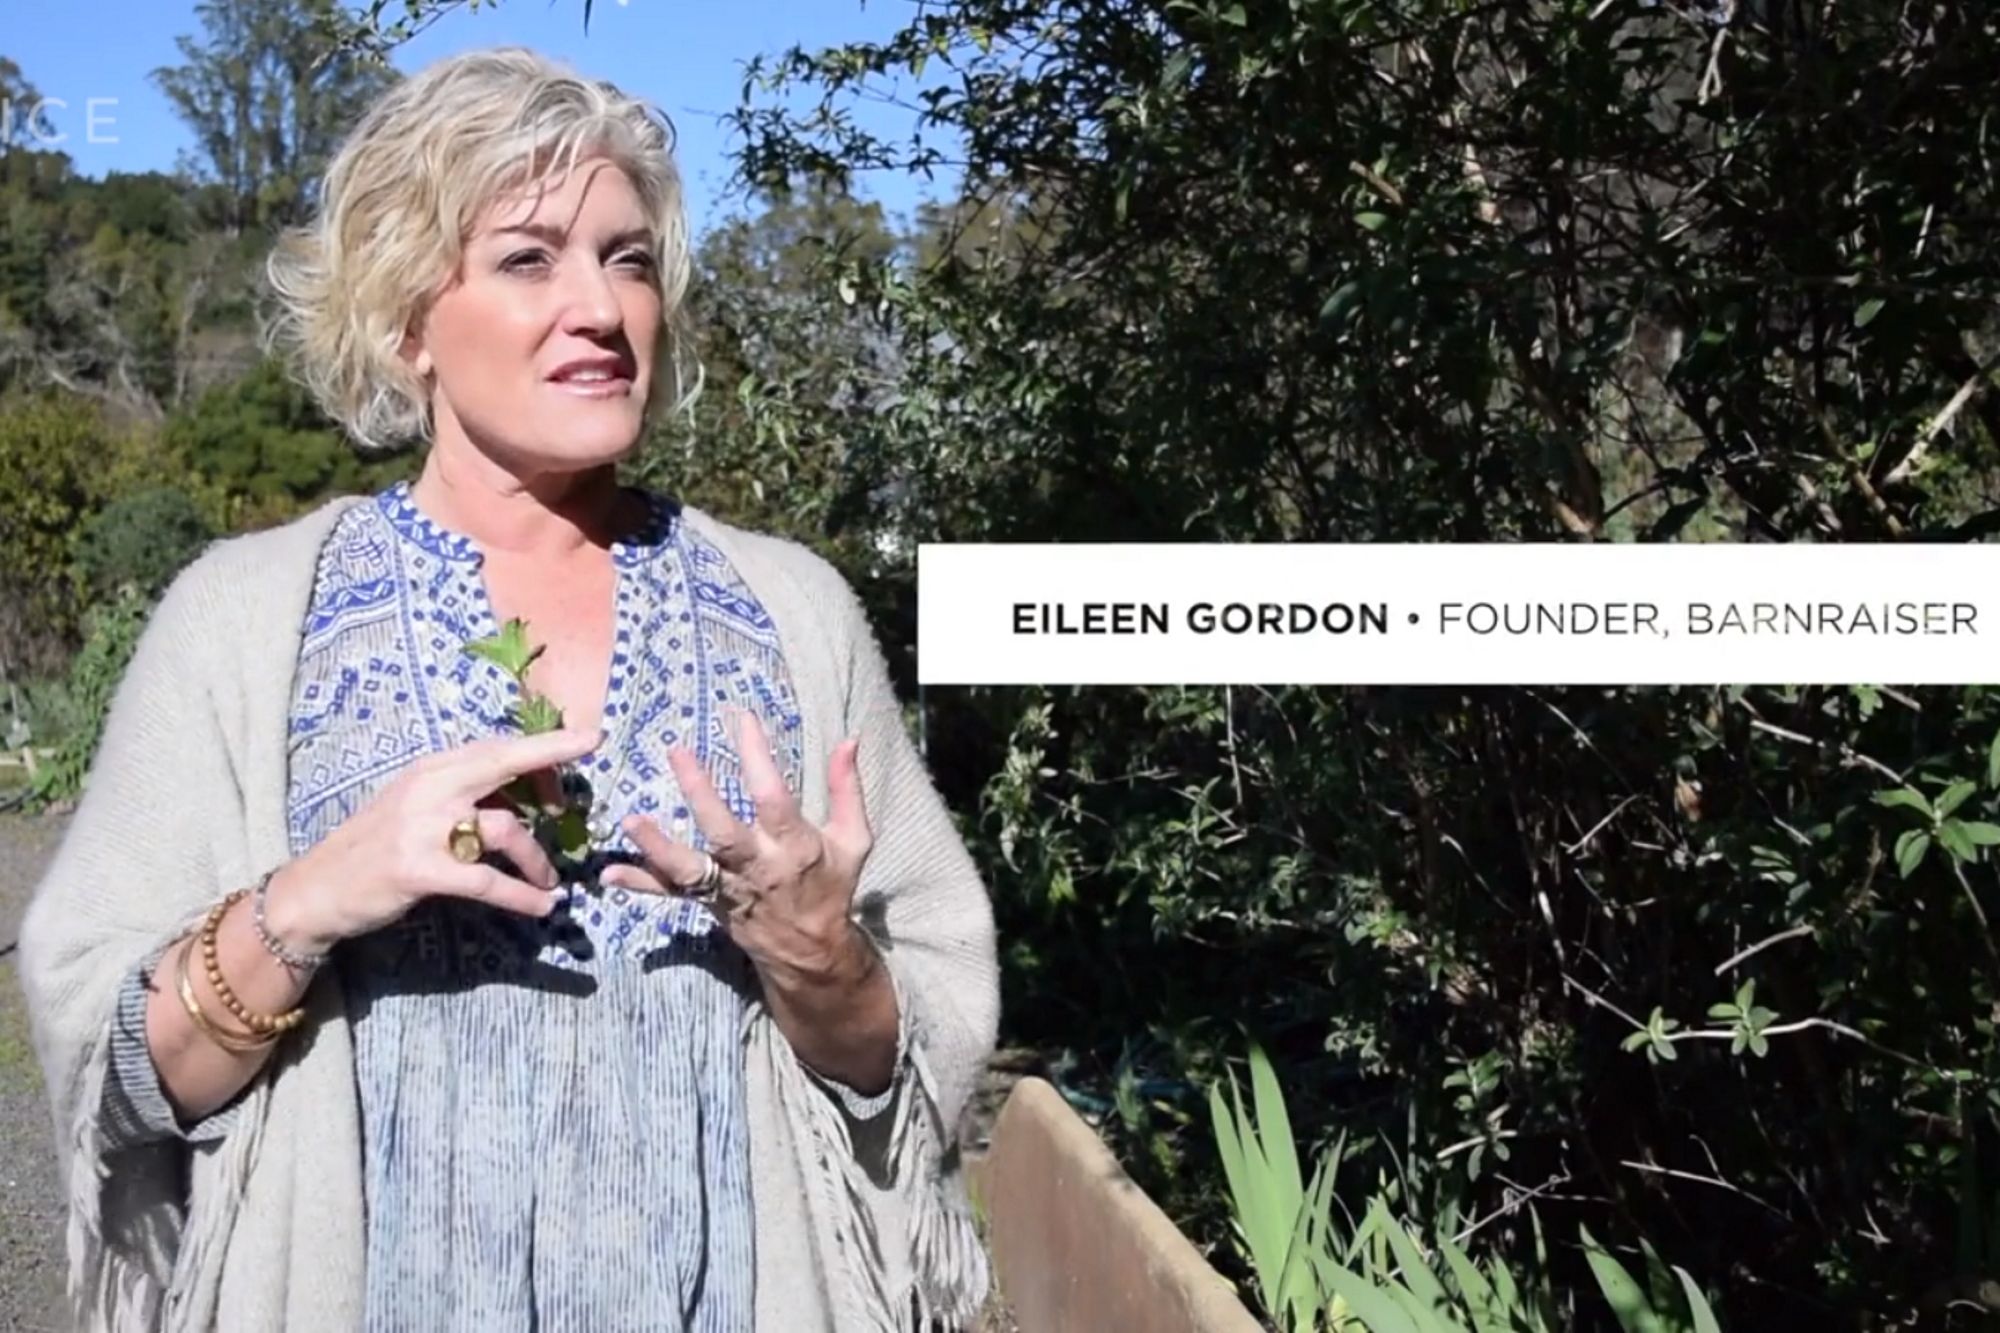 Eileen Gordon Turned a Good Old-Fashioned Barnraiser Into a Growing Startup